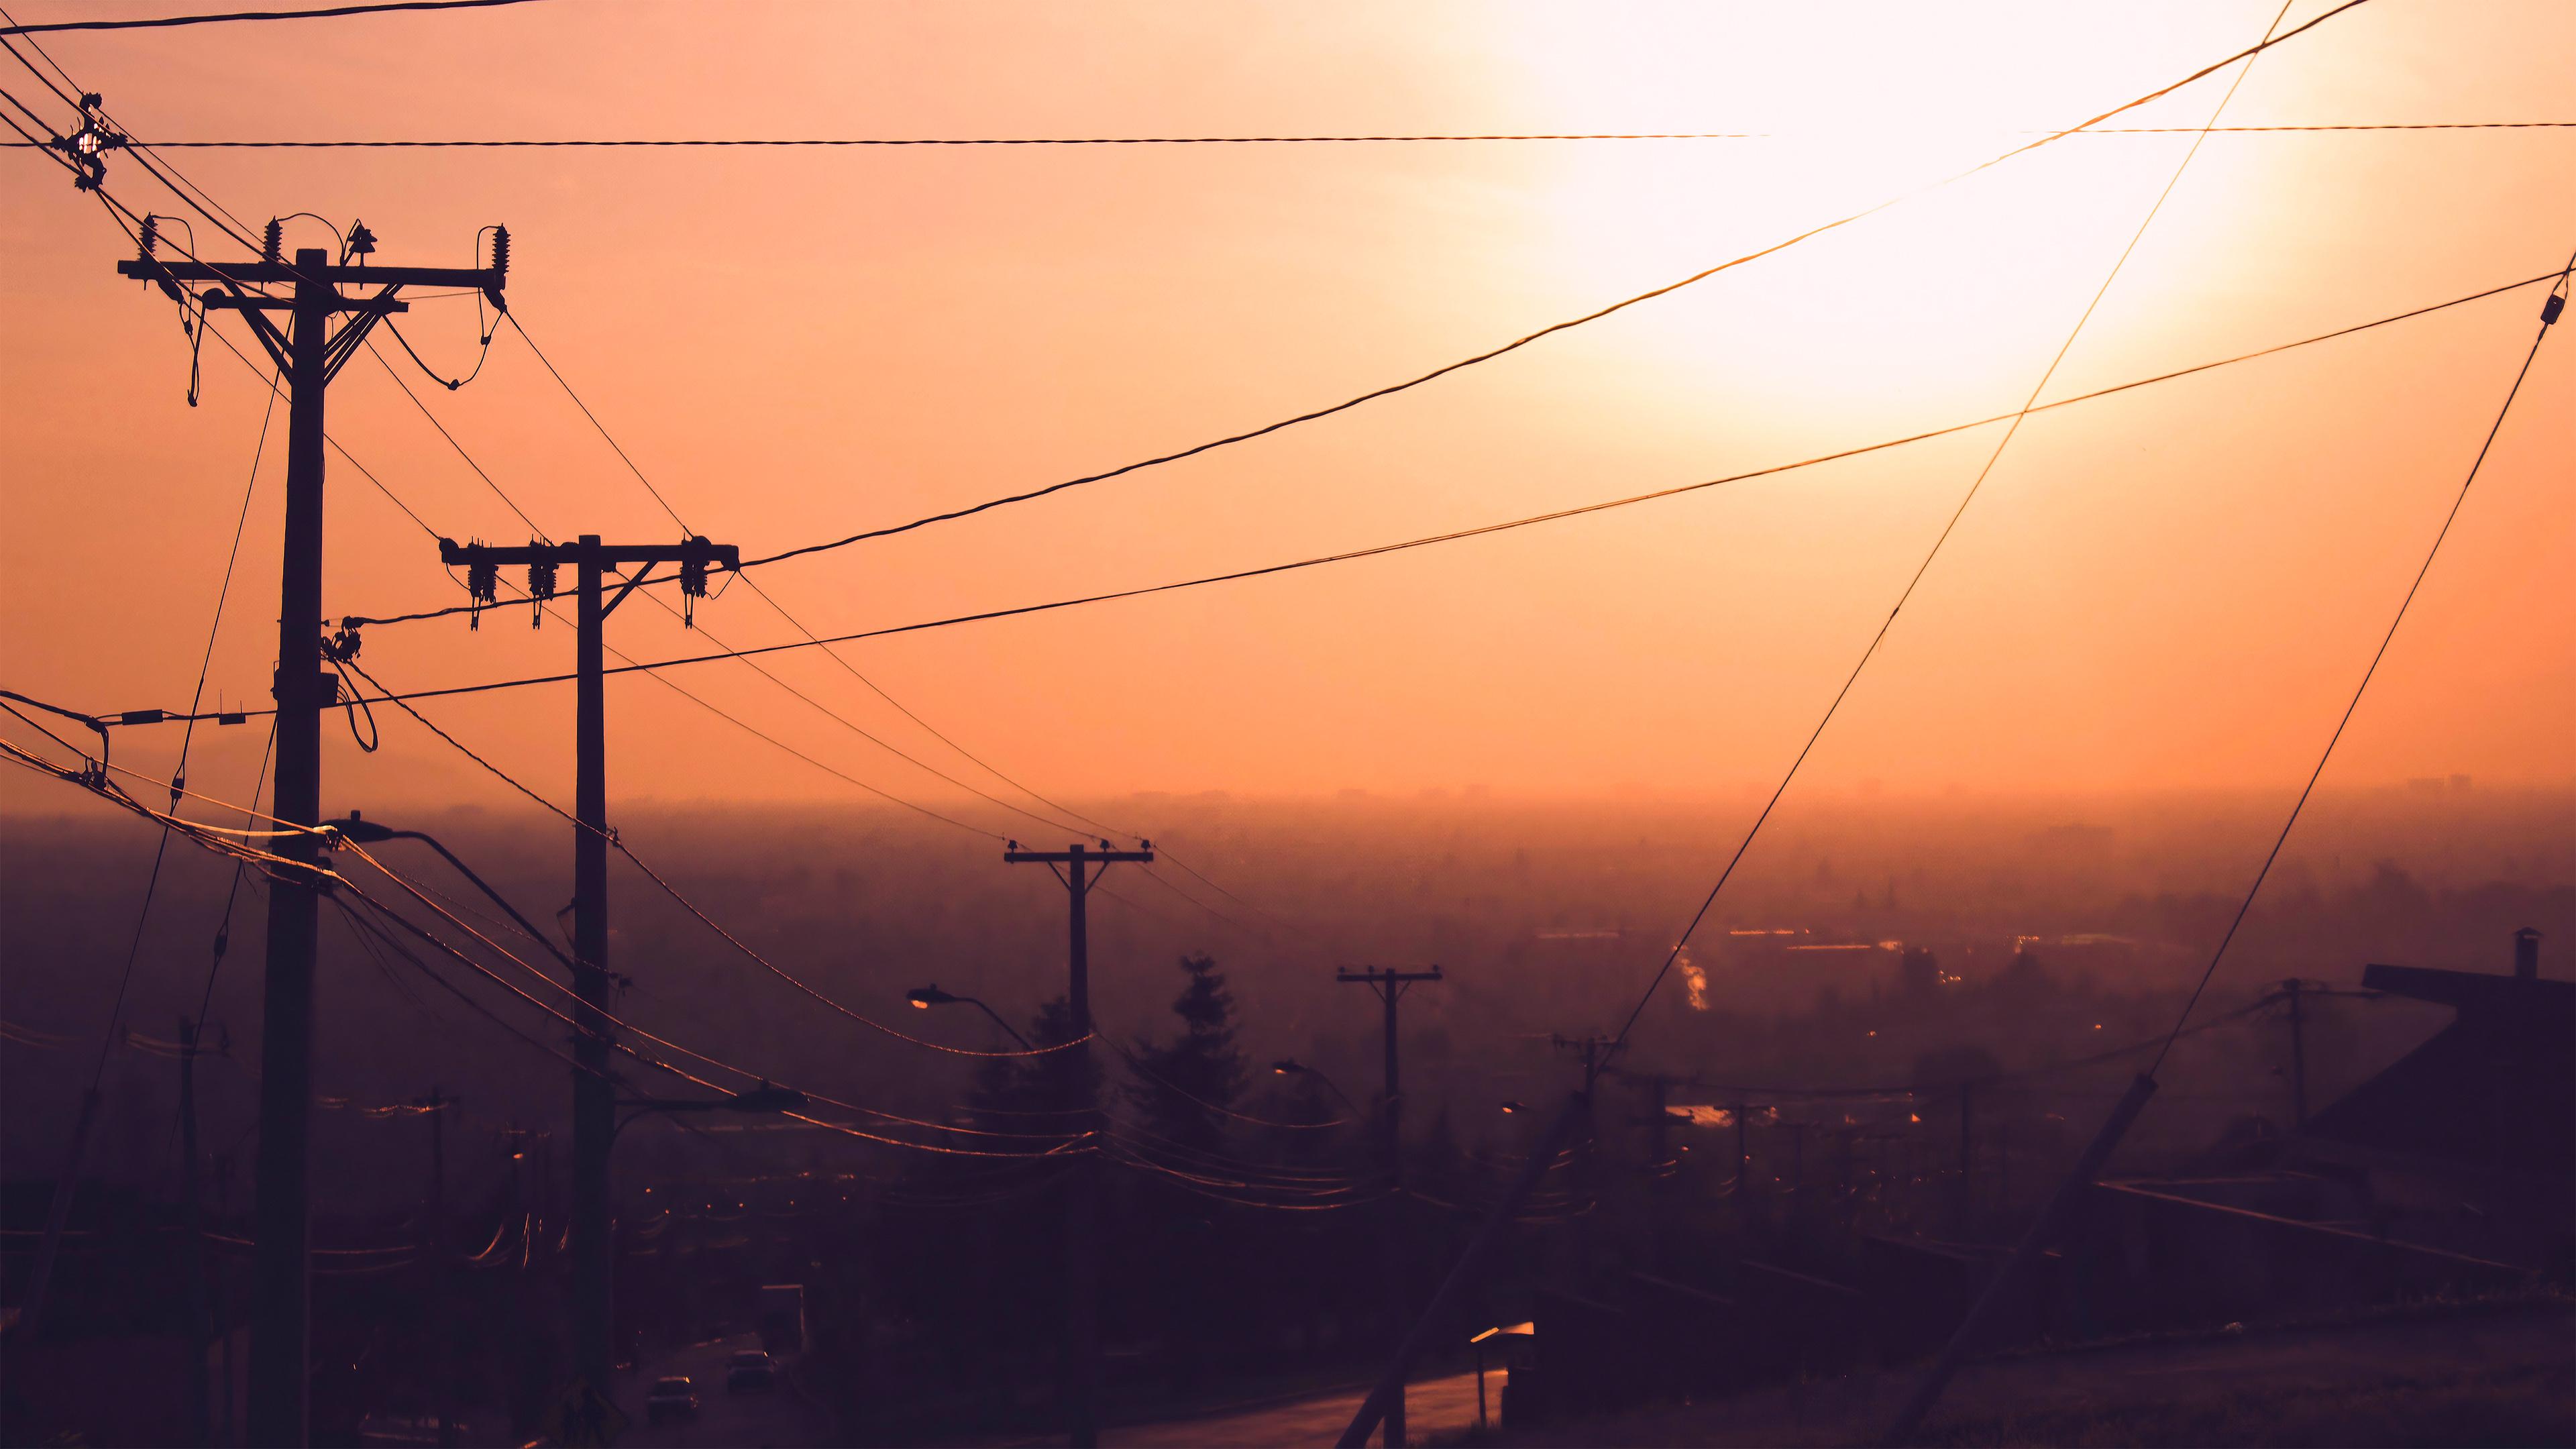 Powerlines 4K wallpaper for your desktop or mobile screen free and easy to download